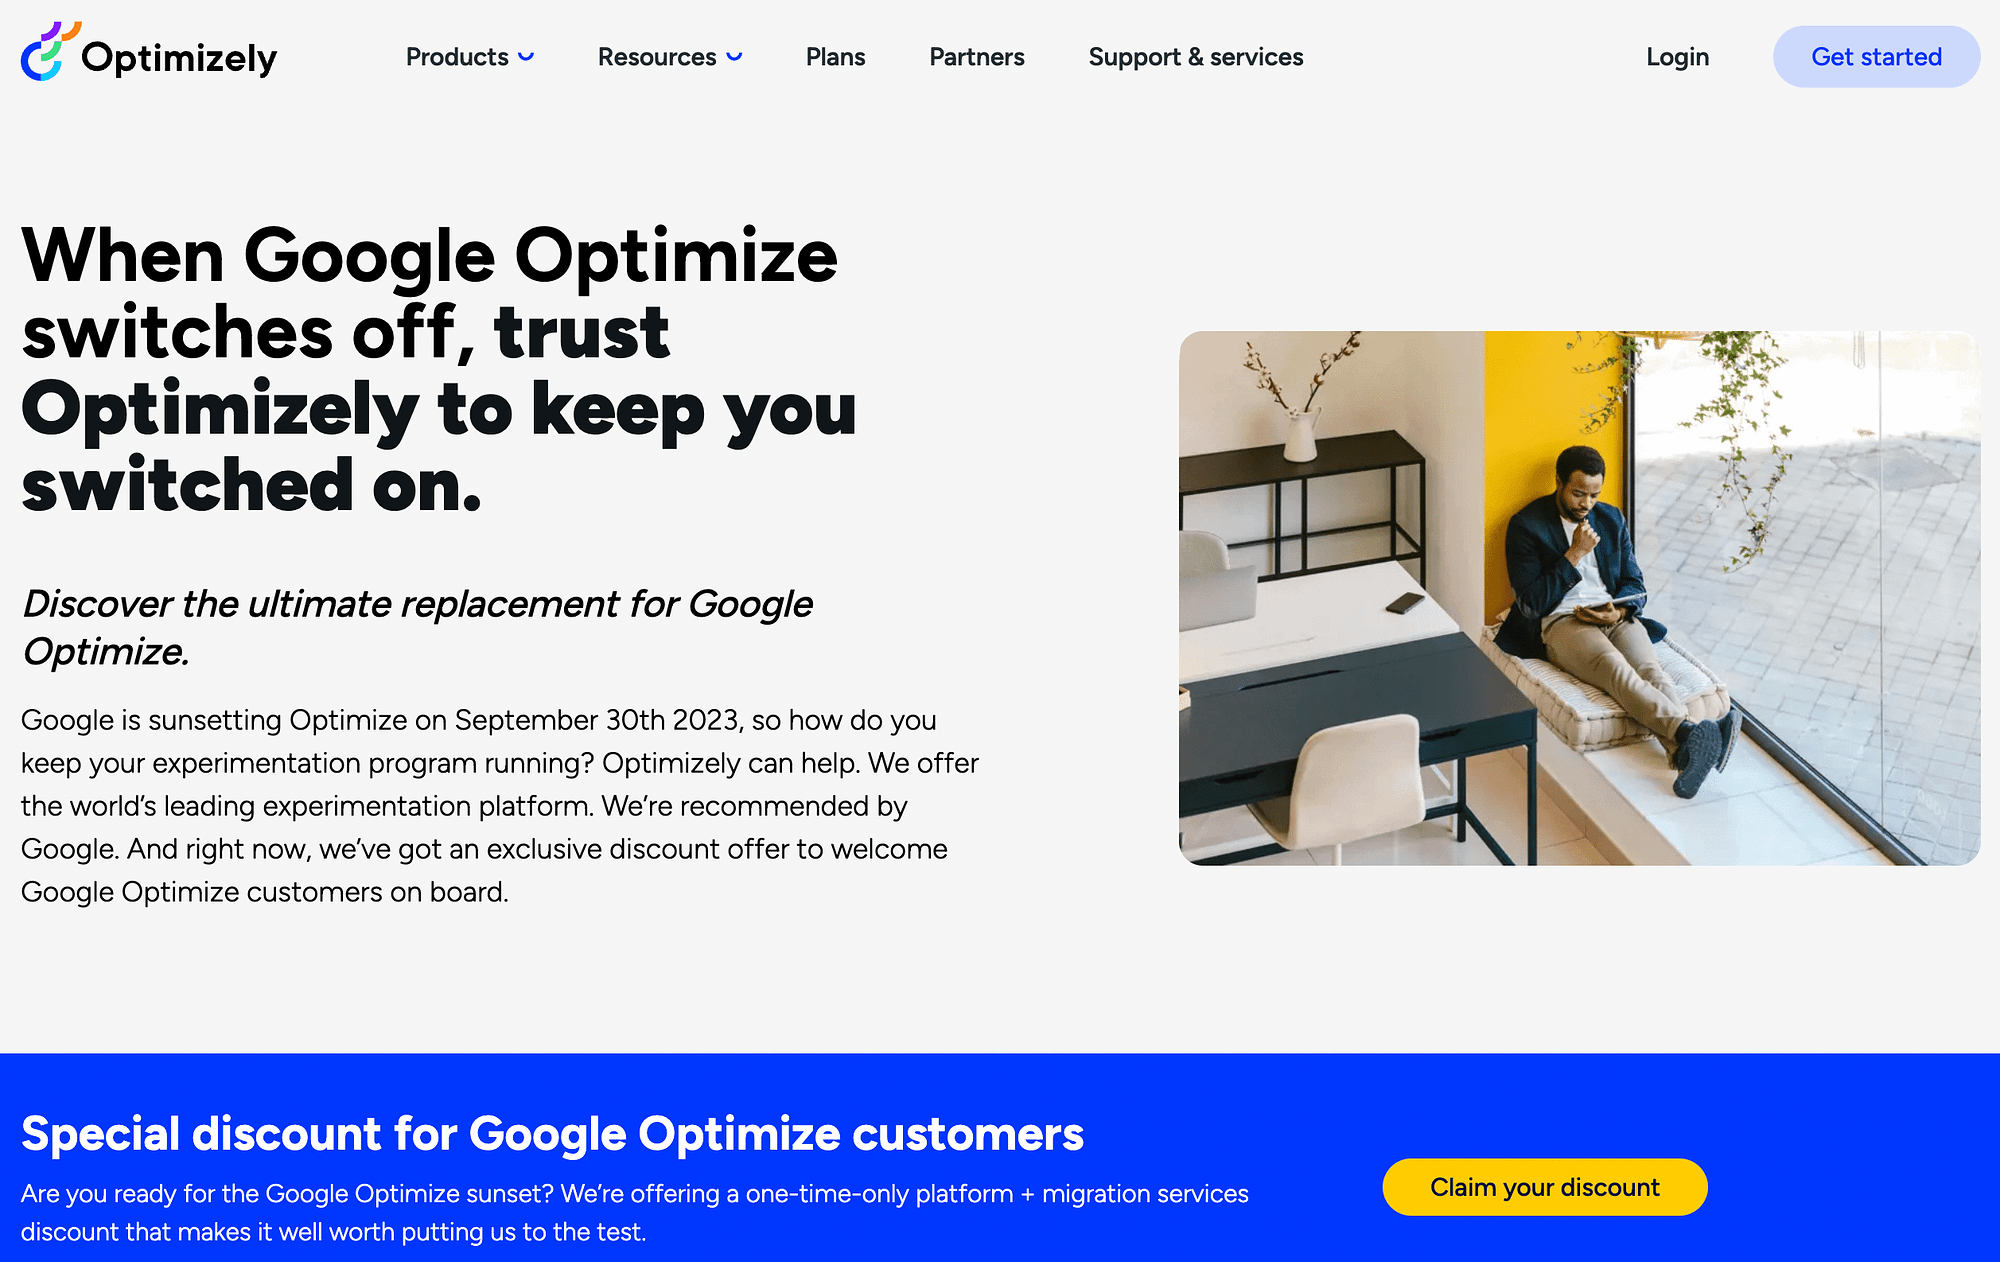 Optimizely offers migration services from Google Optimize, plus a discounted rate for Google Optimize customers